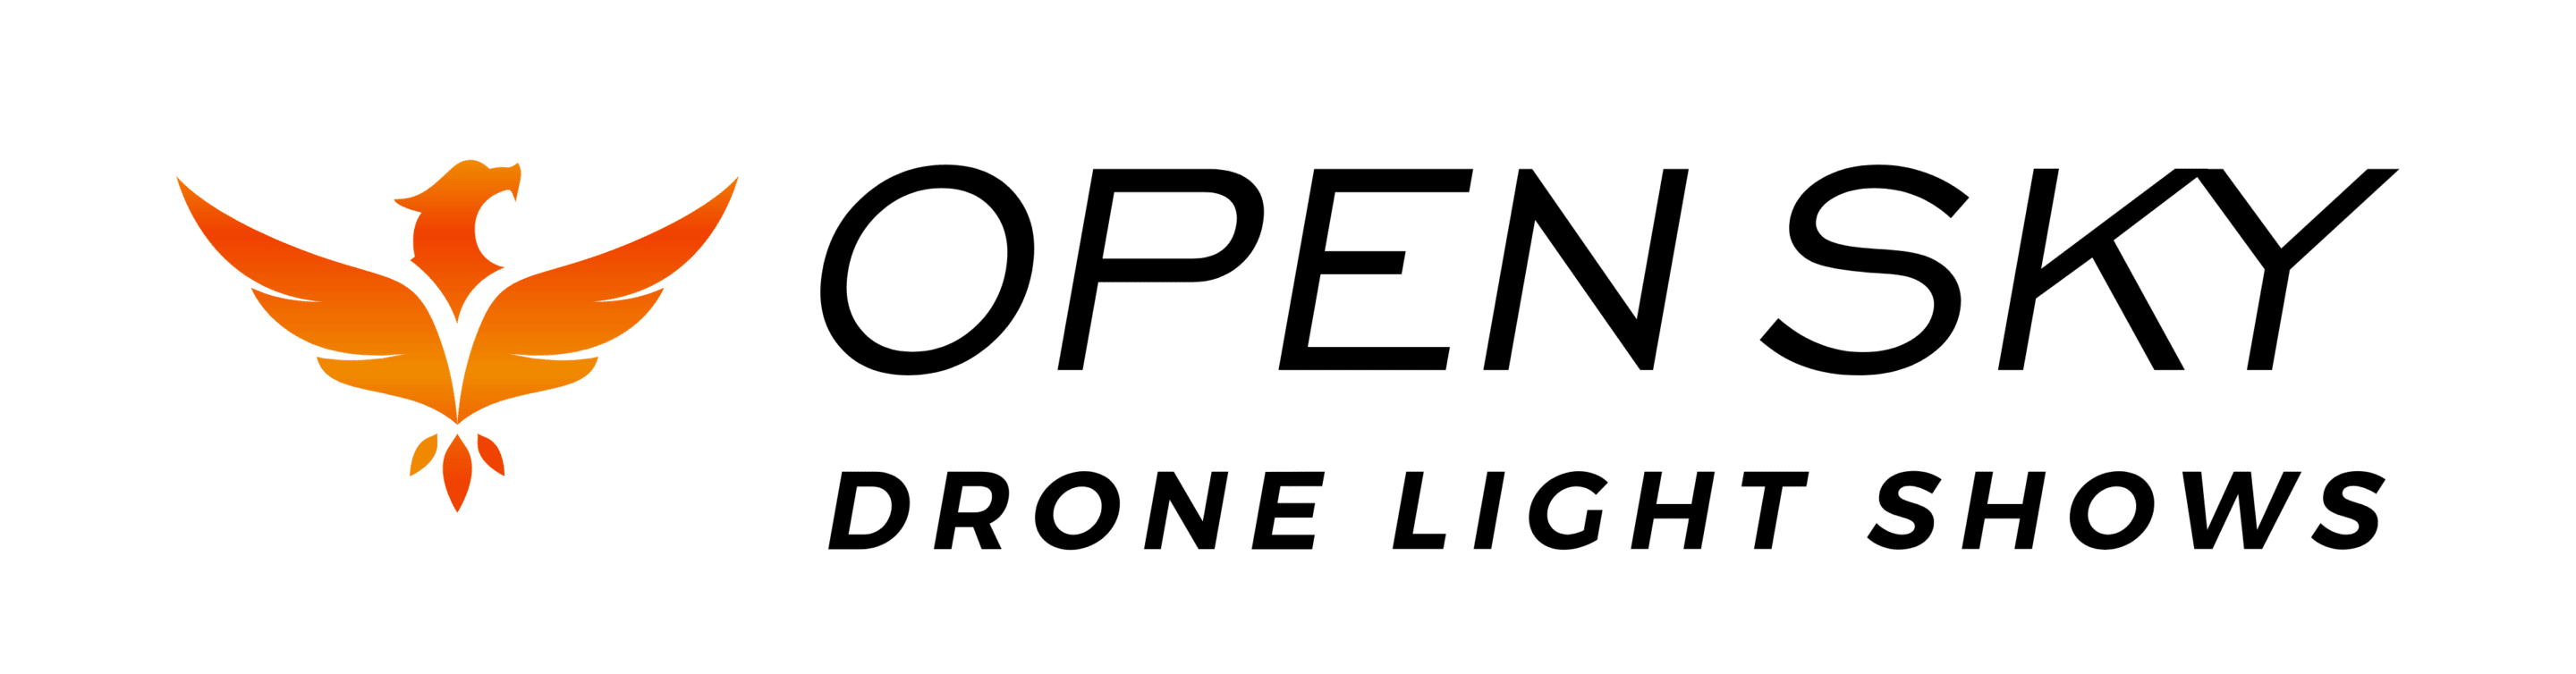 Open Sky Drone Shows